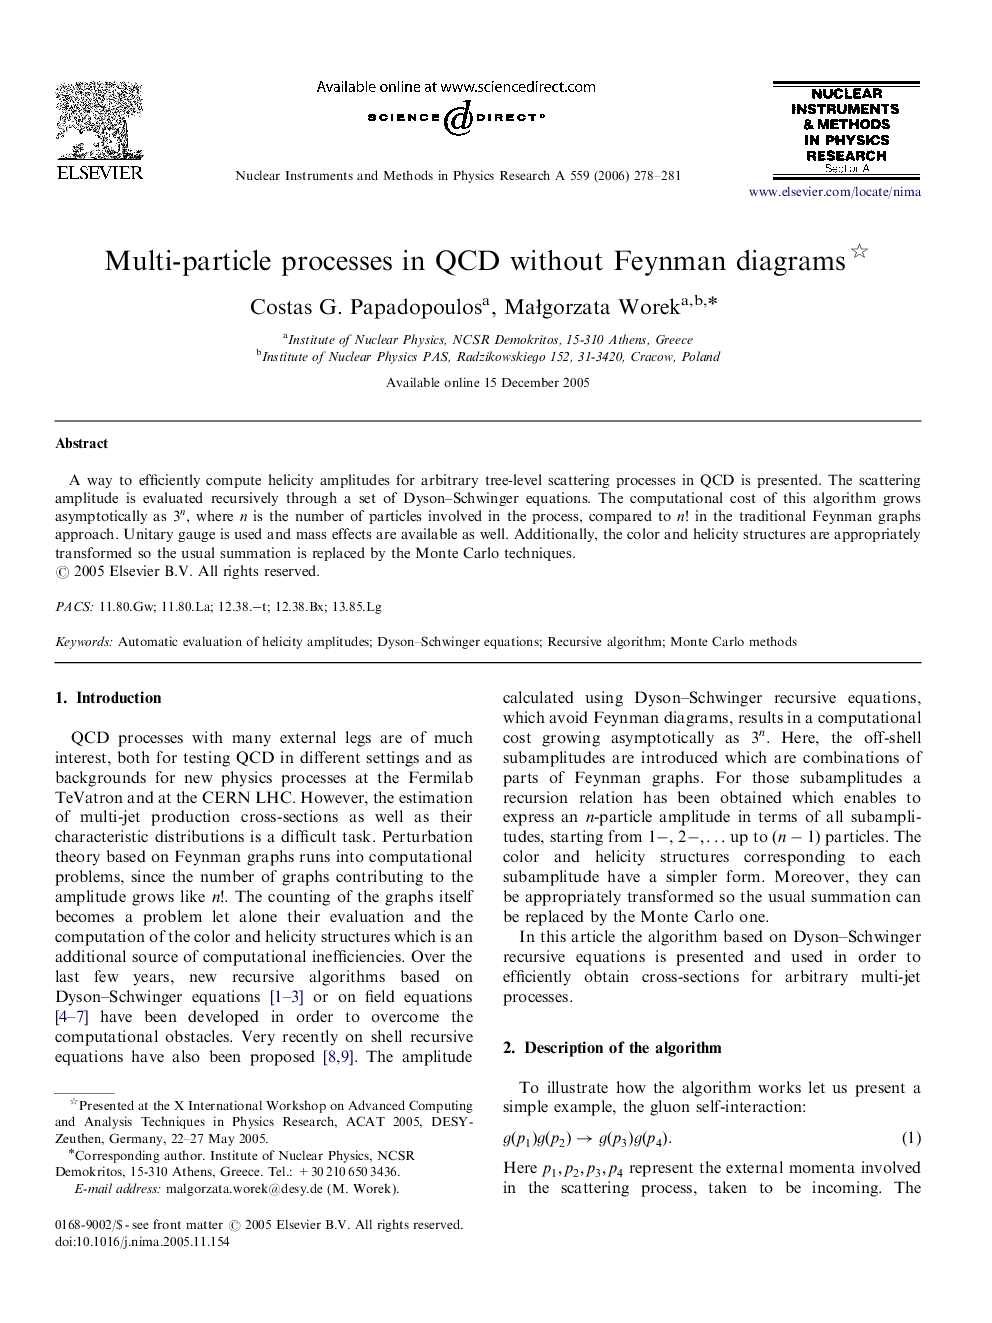 Multi-particle processes in QCD without Feynman diagrams 